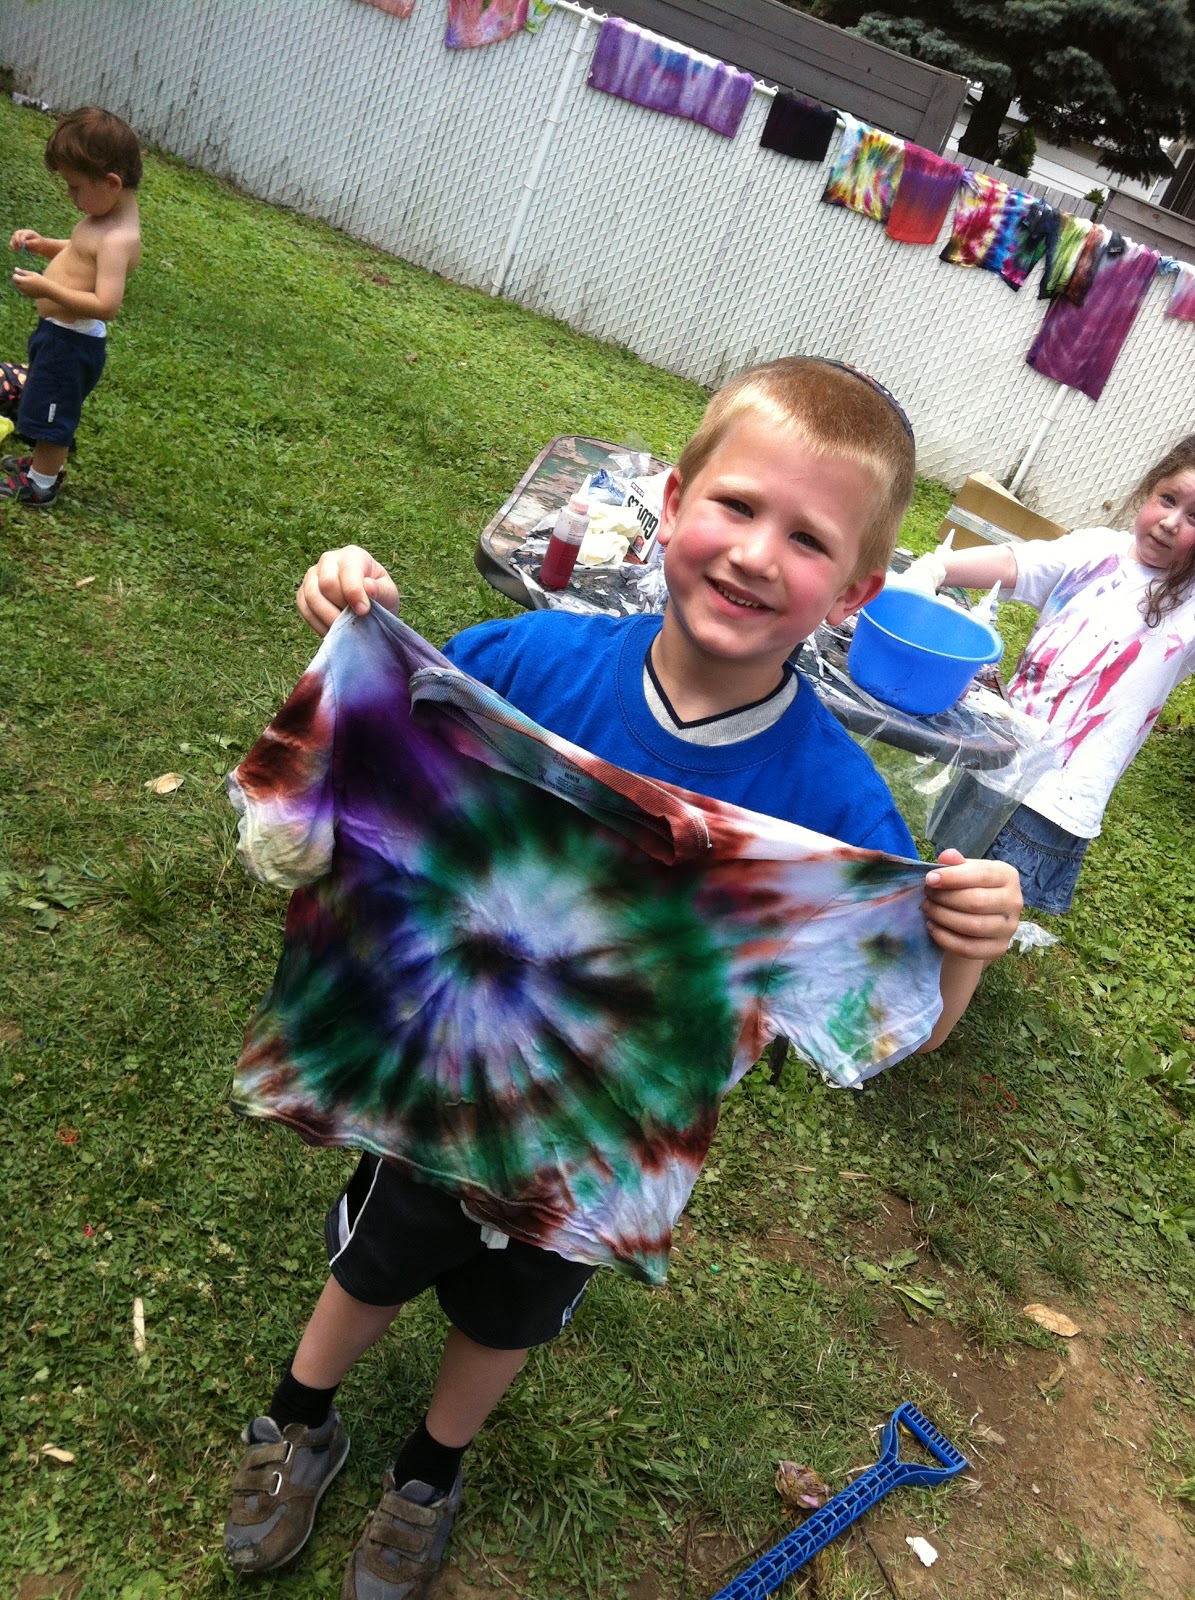 Not 2 Shabbey: Tie Dying - The Great American Past Time